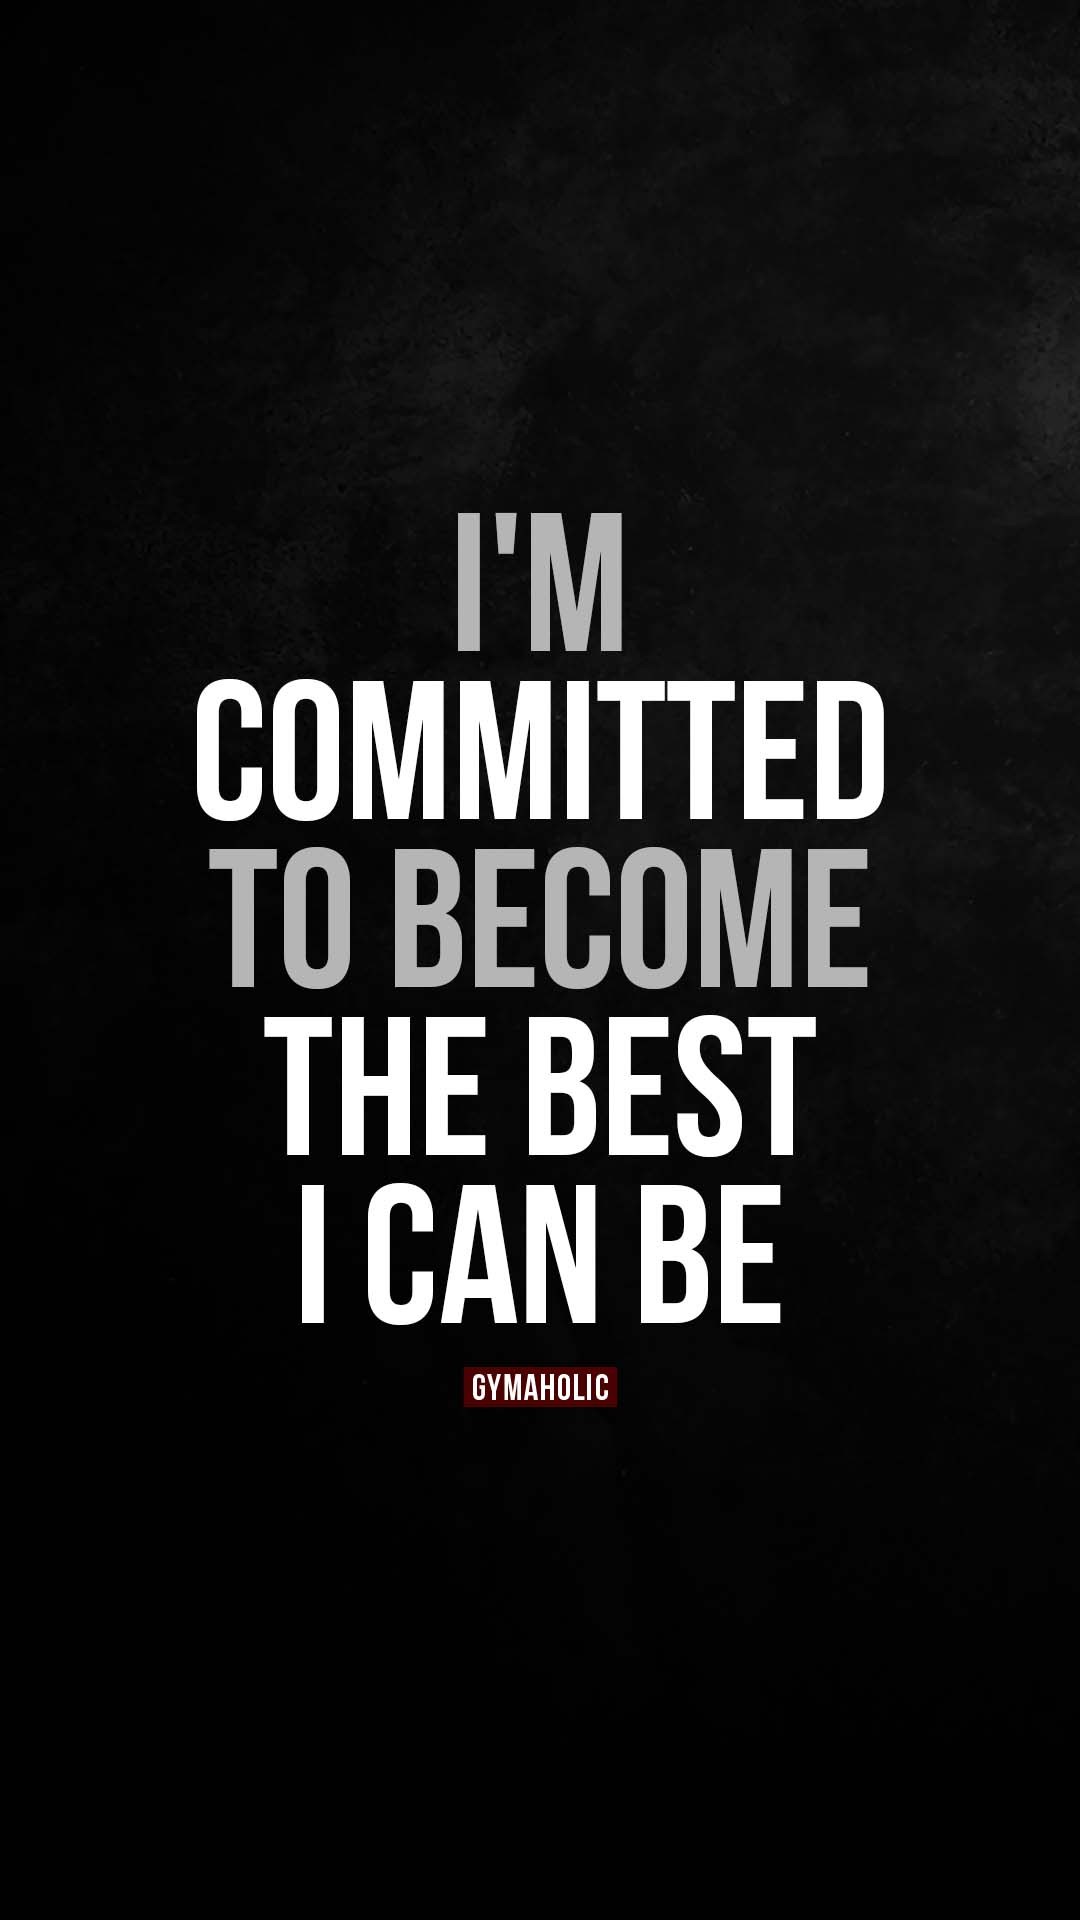 I’m committed to become the best I can be